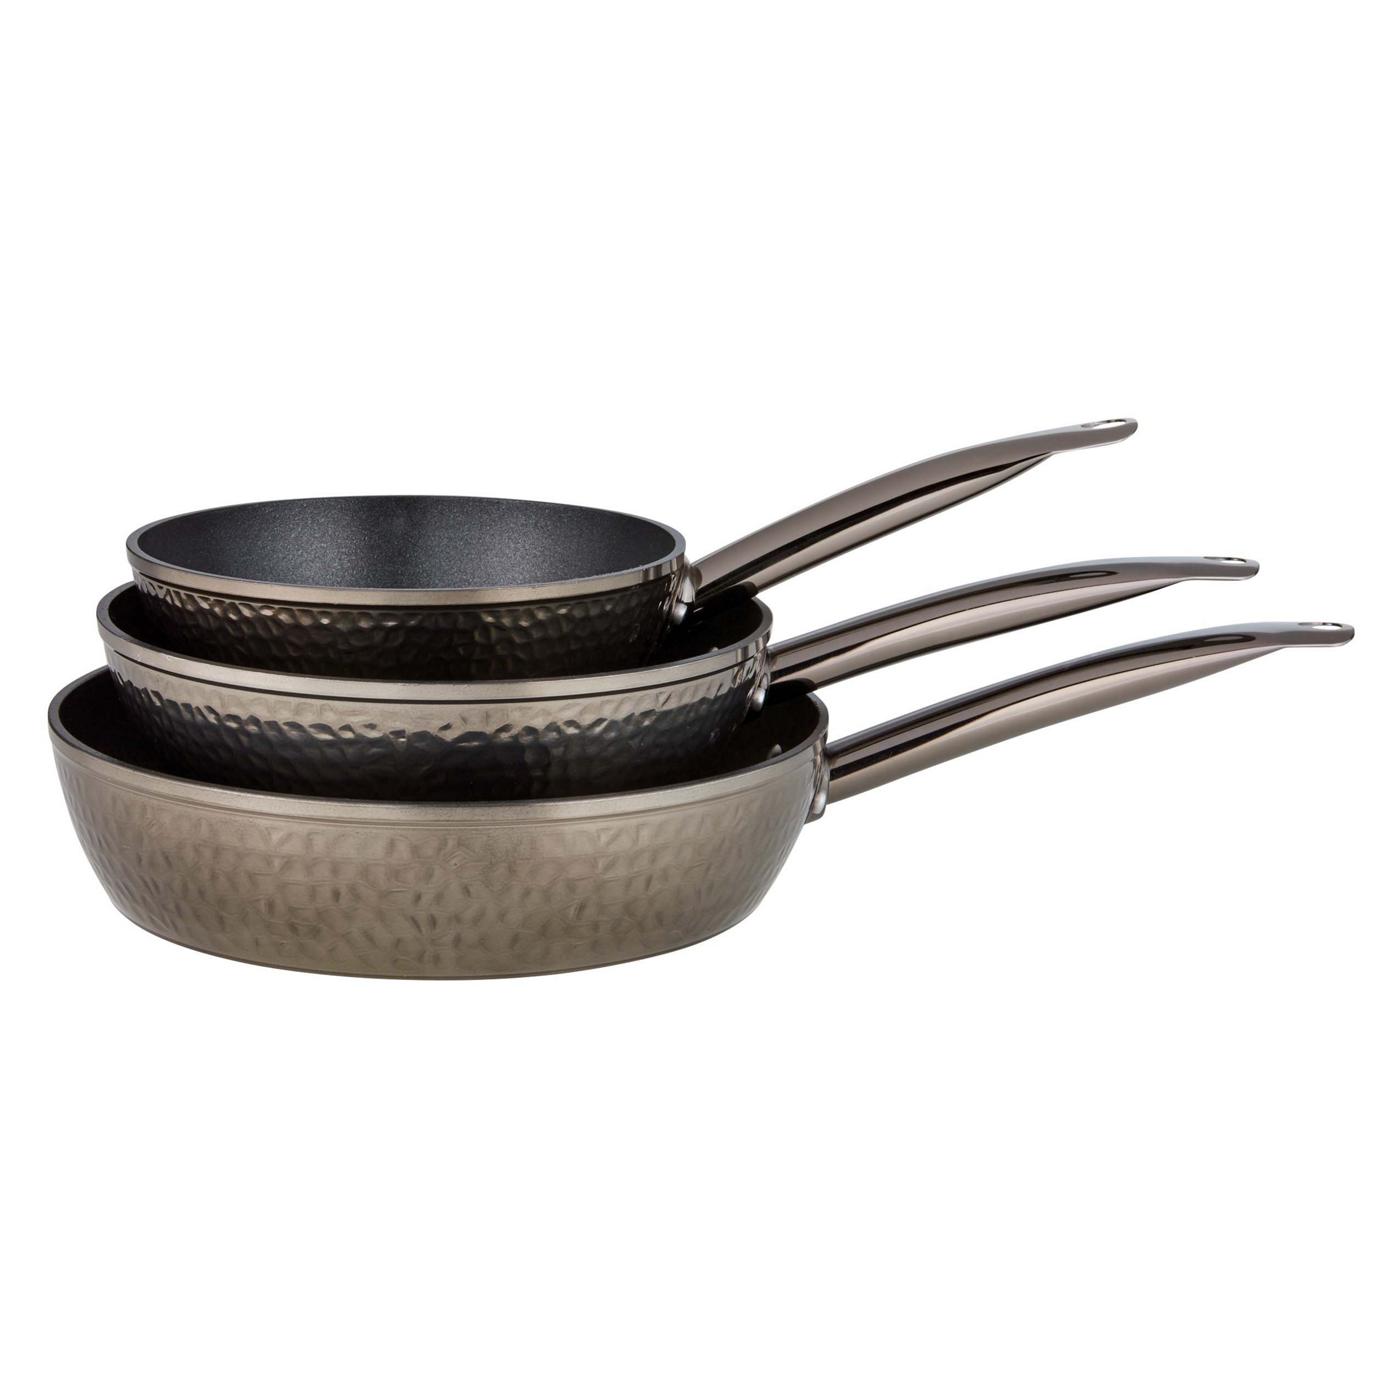 Kitchen & Table by H-E-B Hammered Fry Pan Set - Black; image 2 of 2